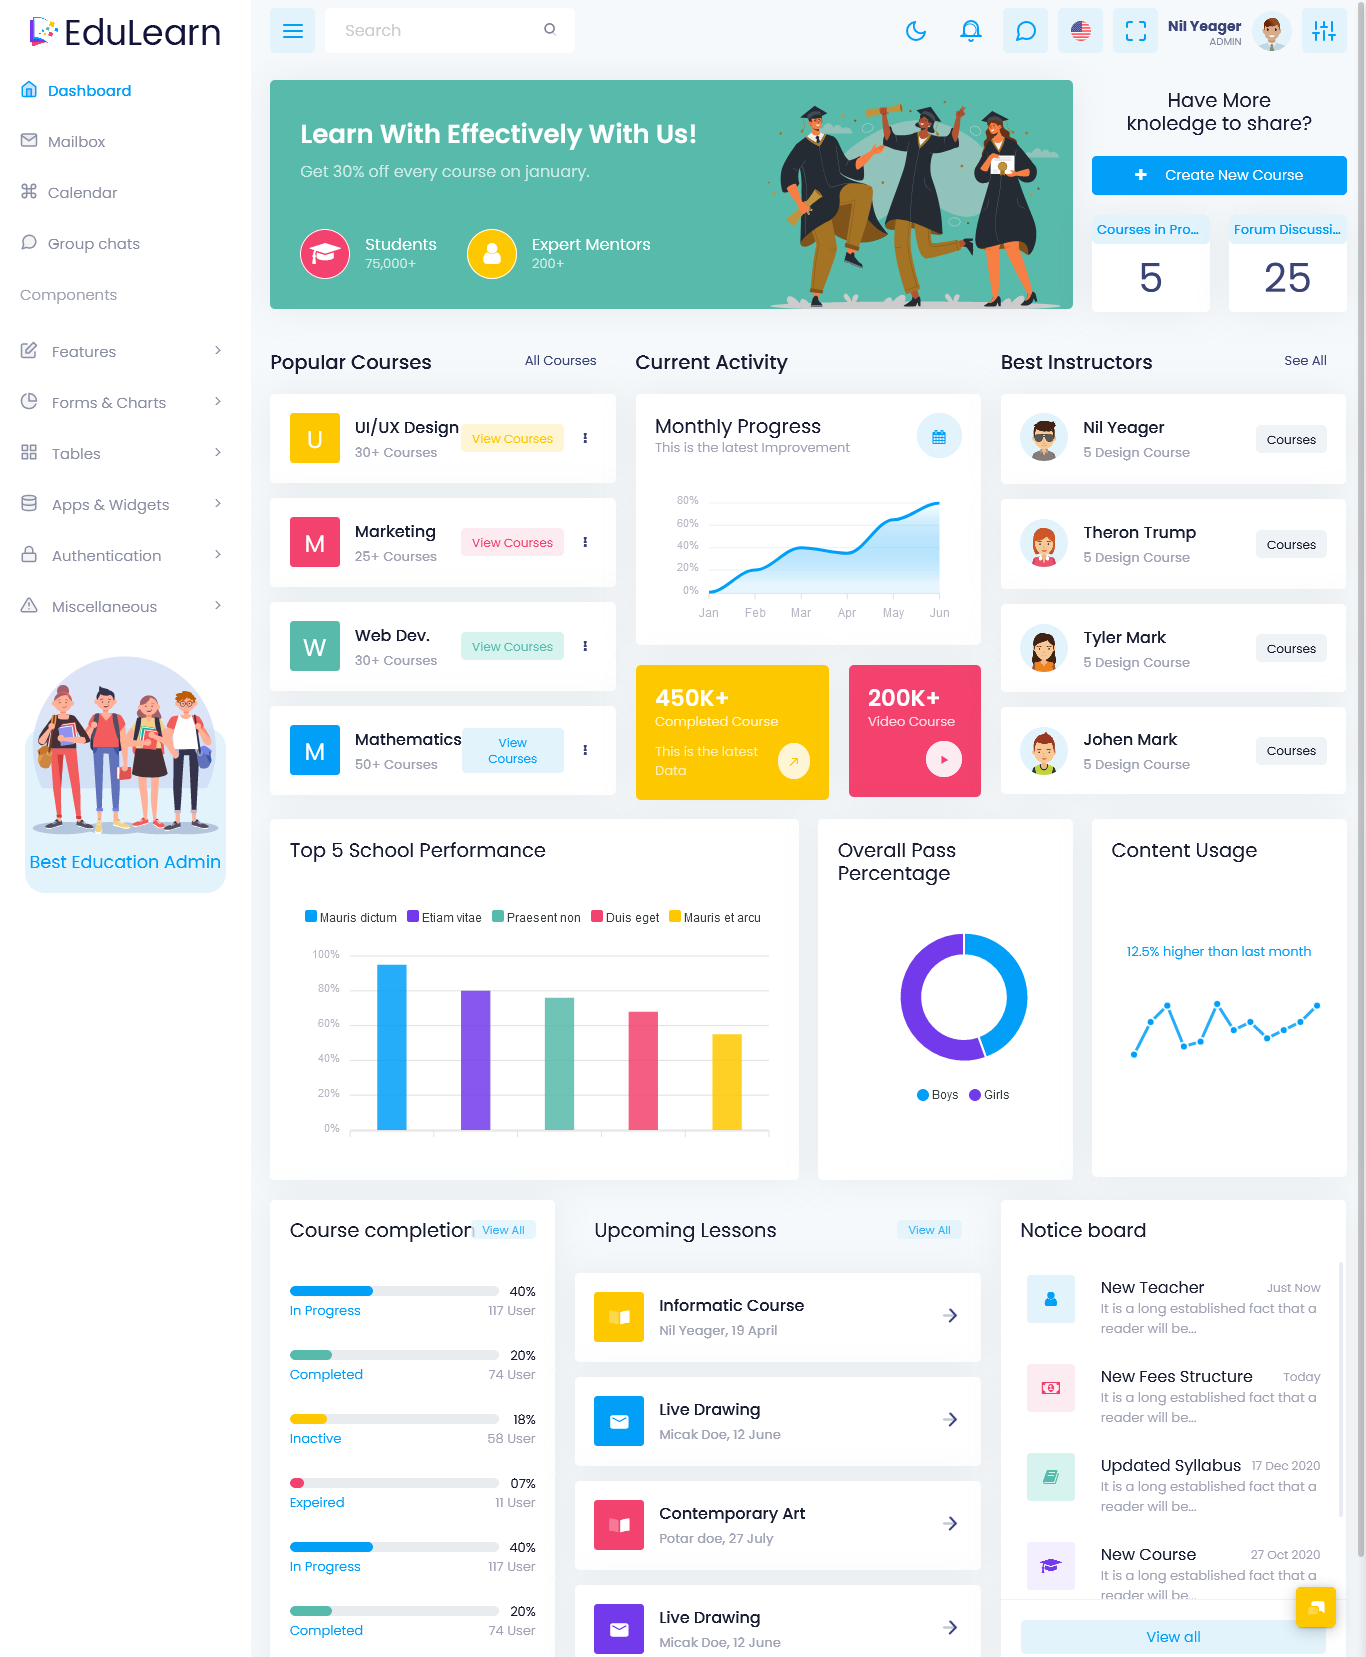 Edulearn - Education Learning Management System Admin Template